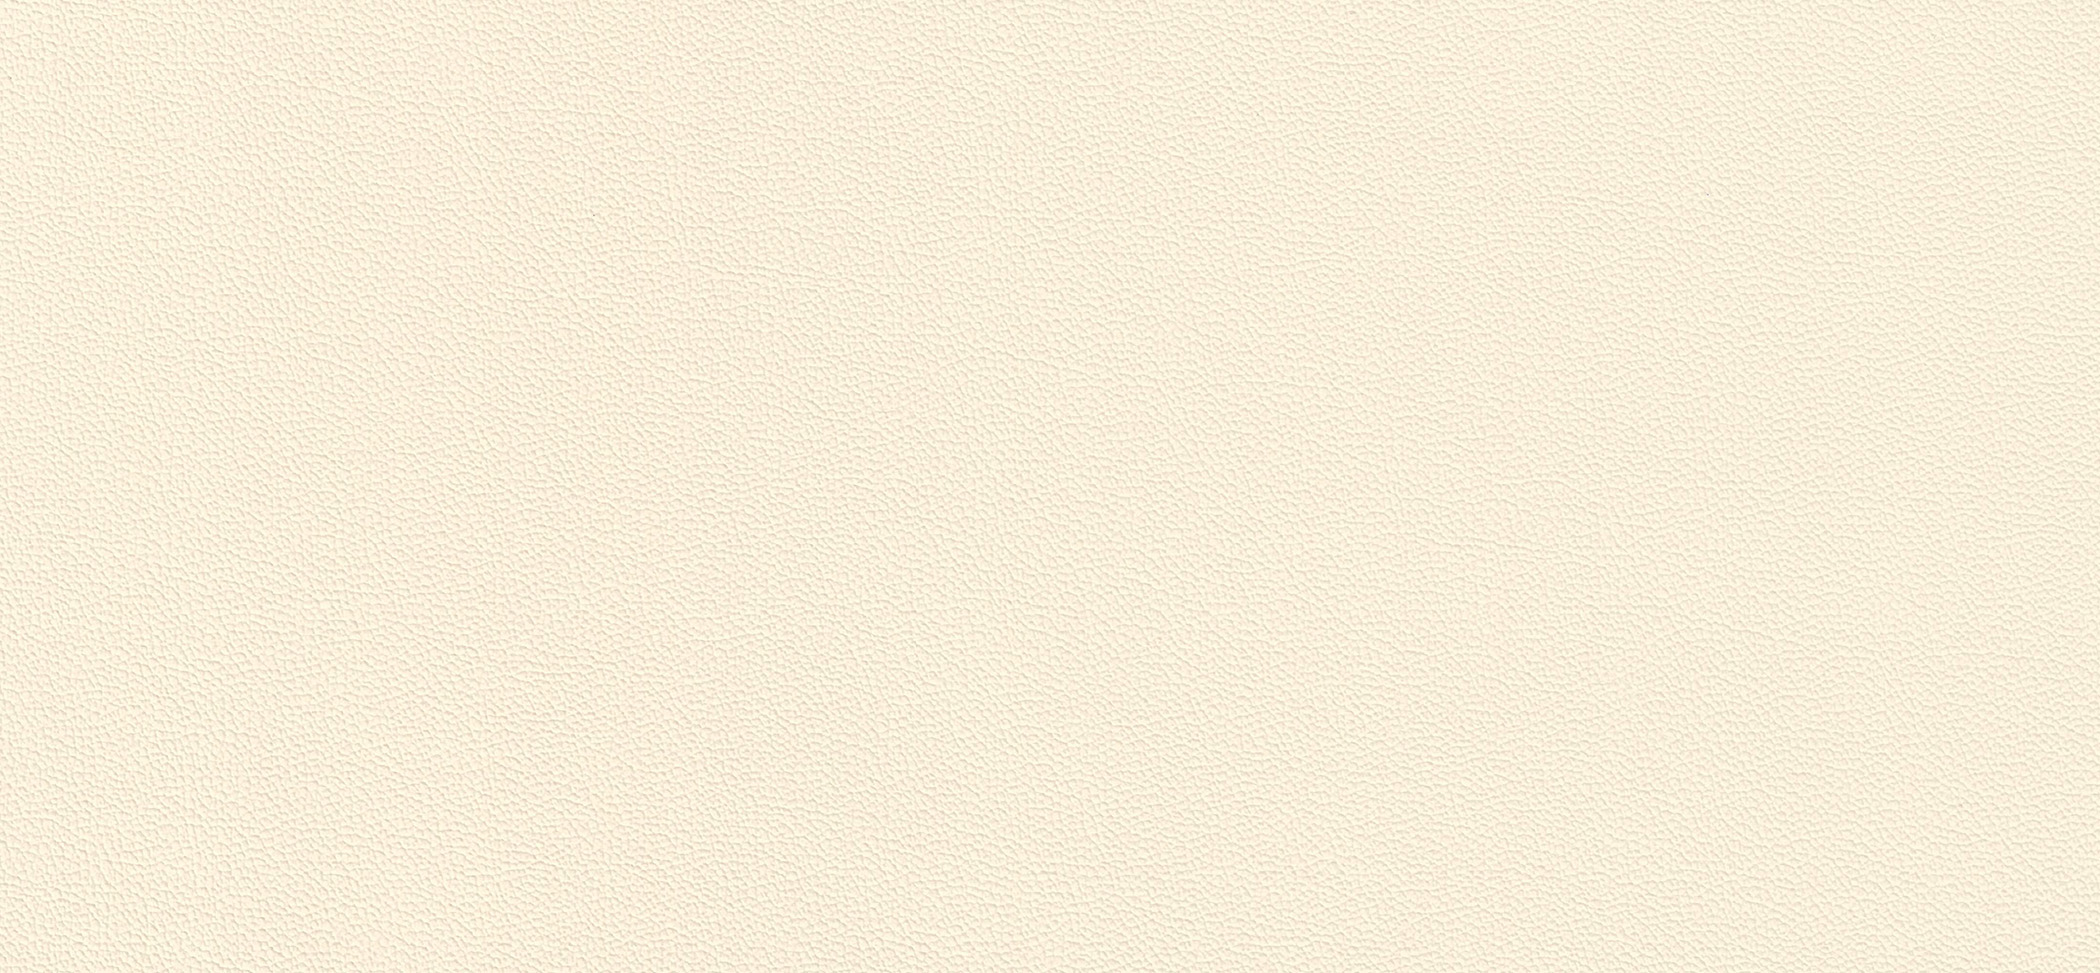 Cleanness beige